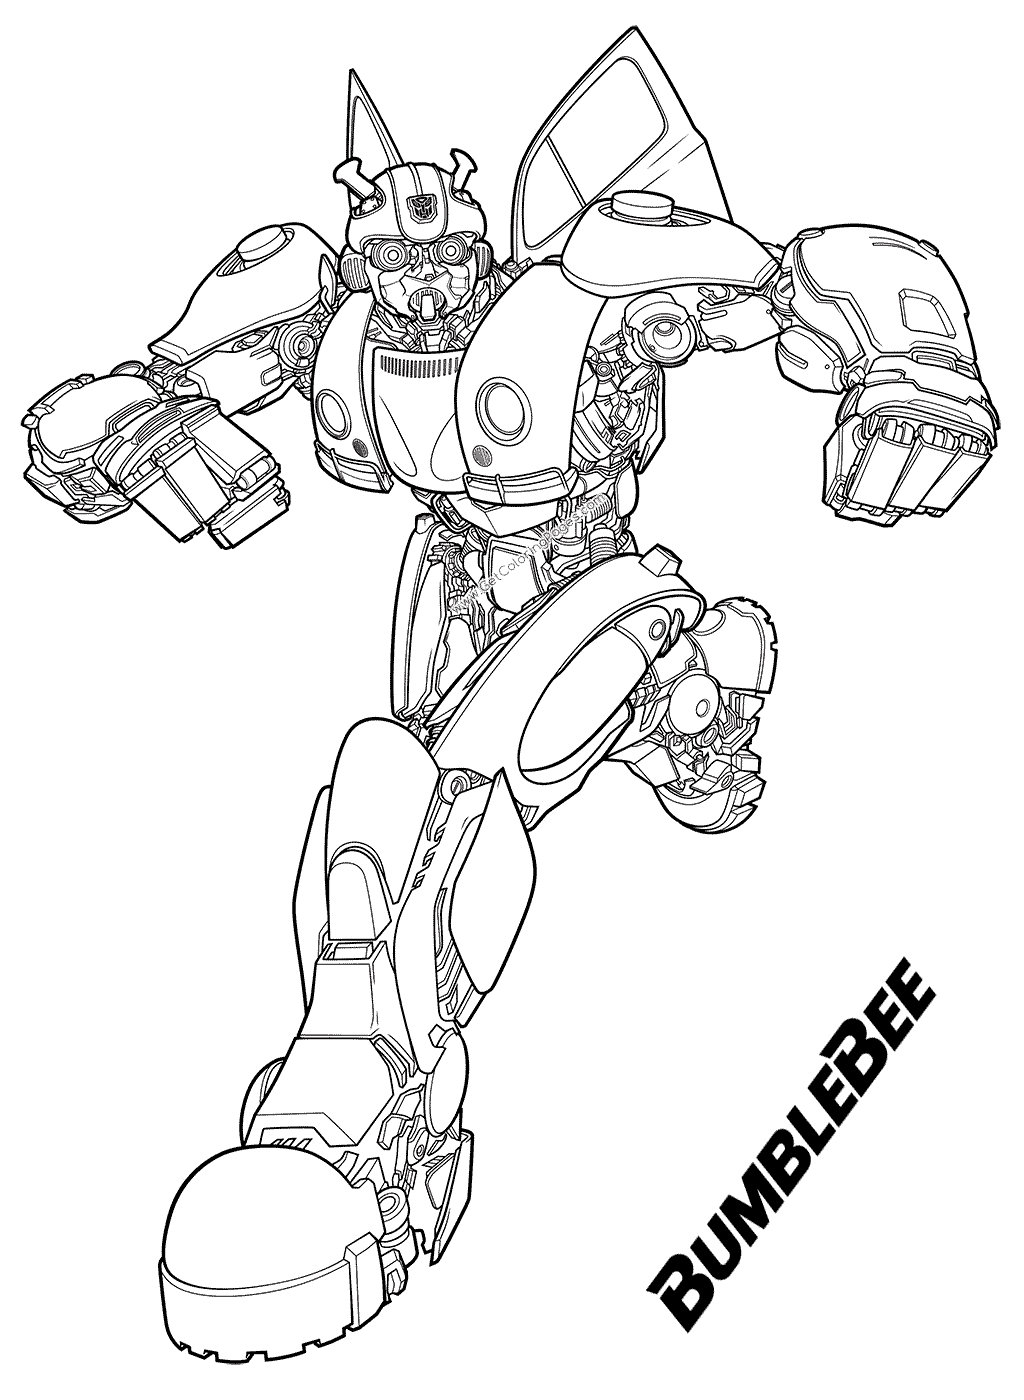 Autobot Bumblebee Coloring Page